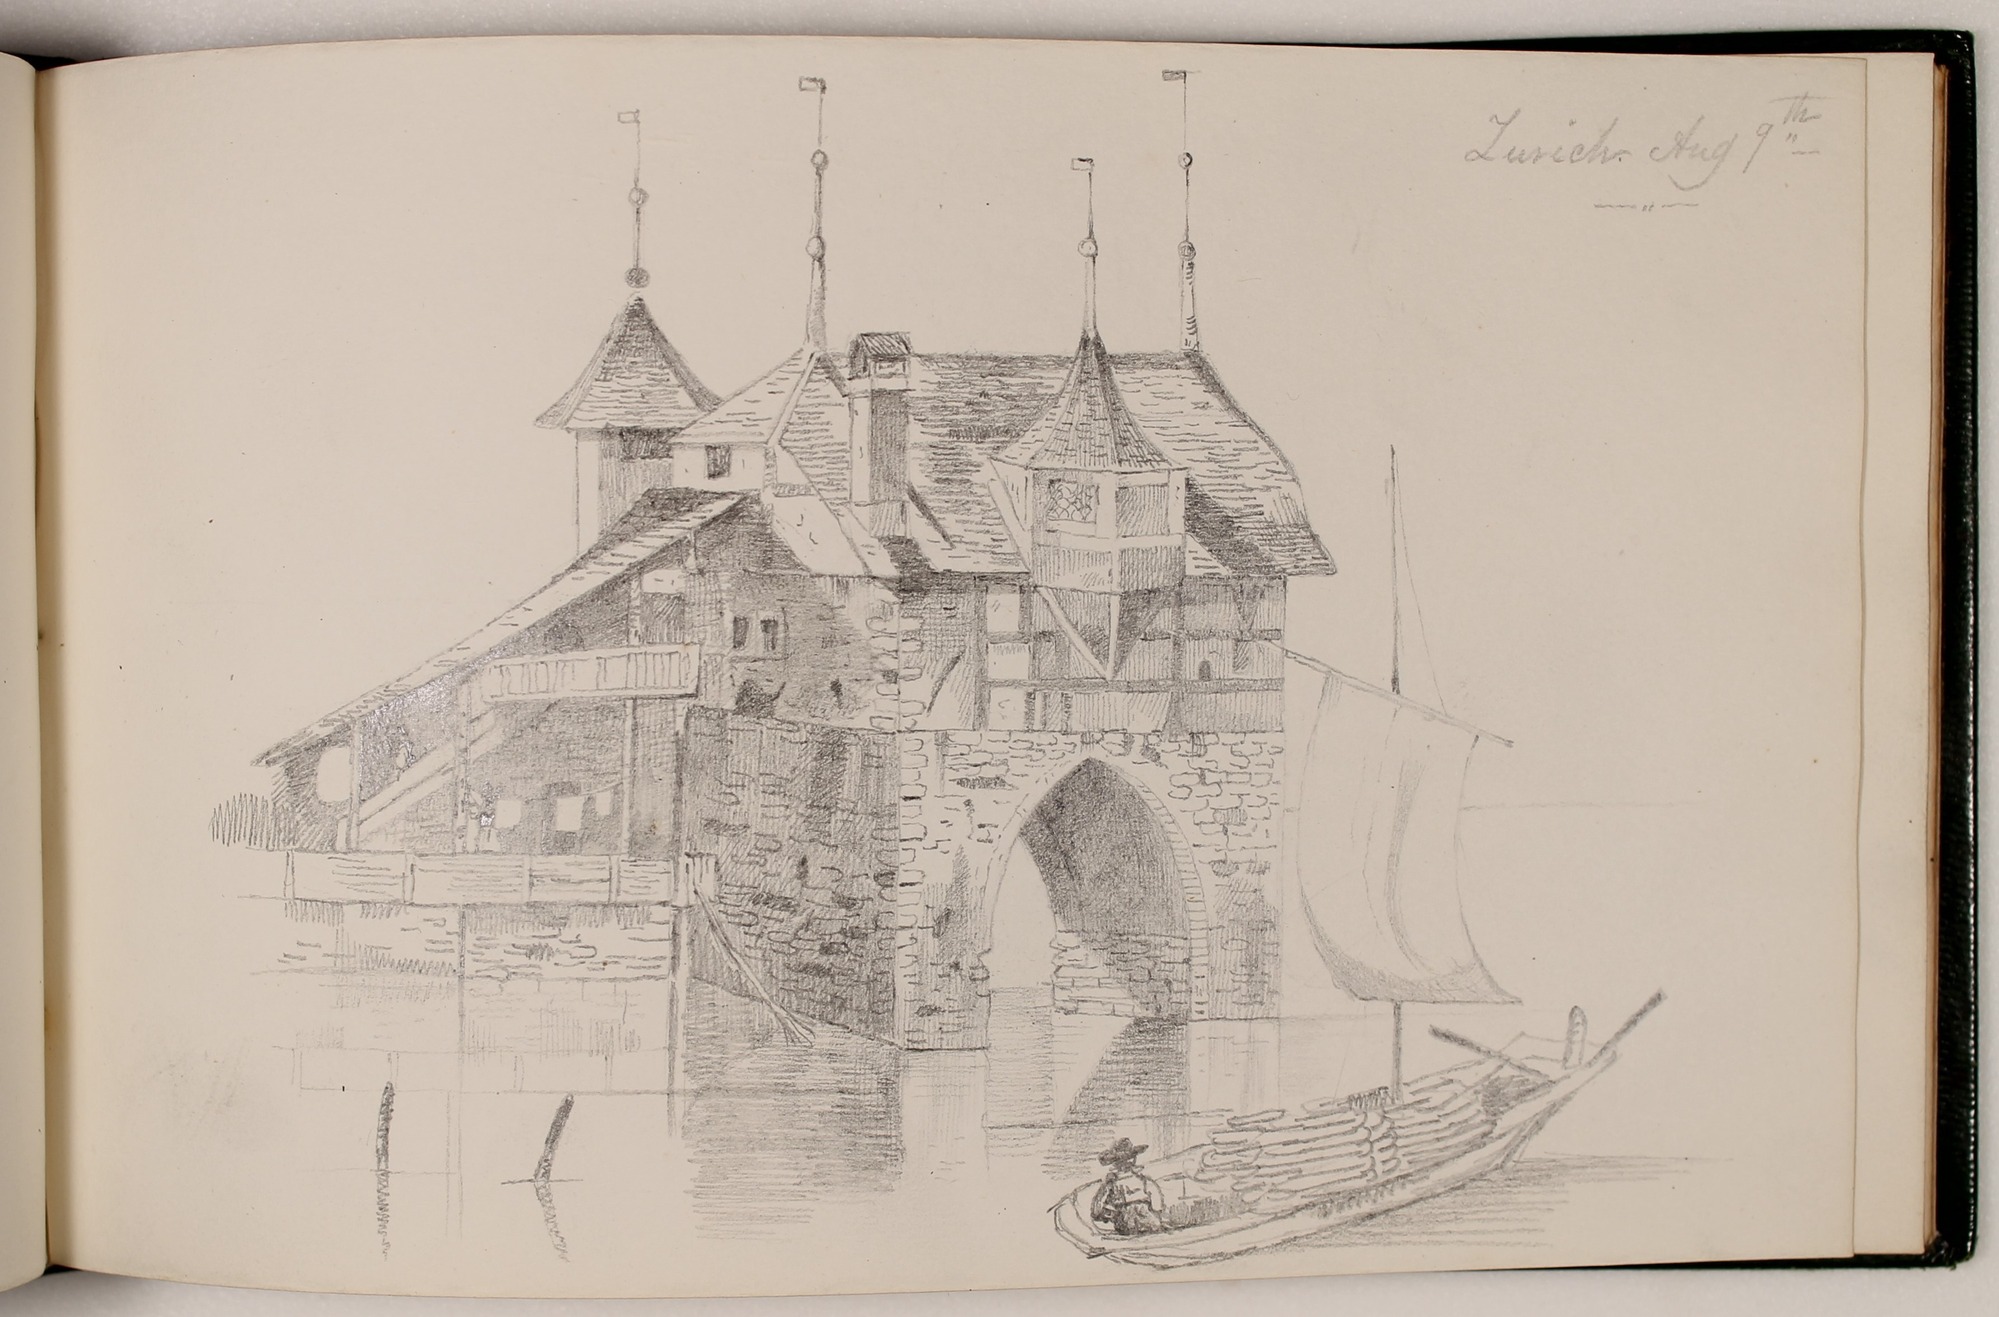 Pencil drawing in sketchbook of building constructed over water with arched foundation, small boat with sail in foreground.